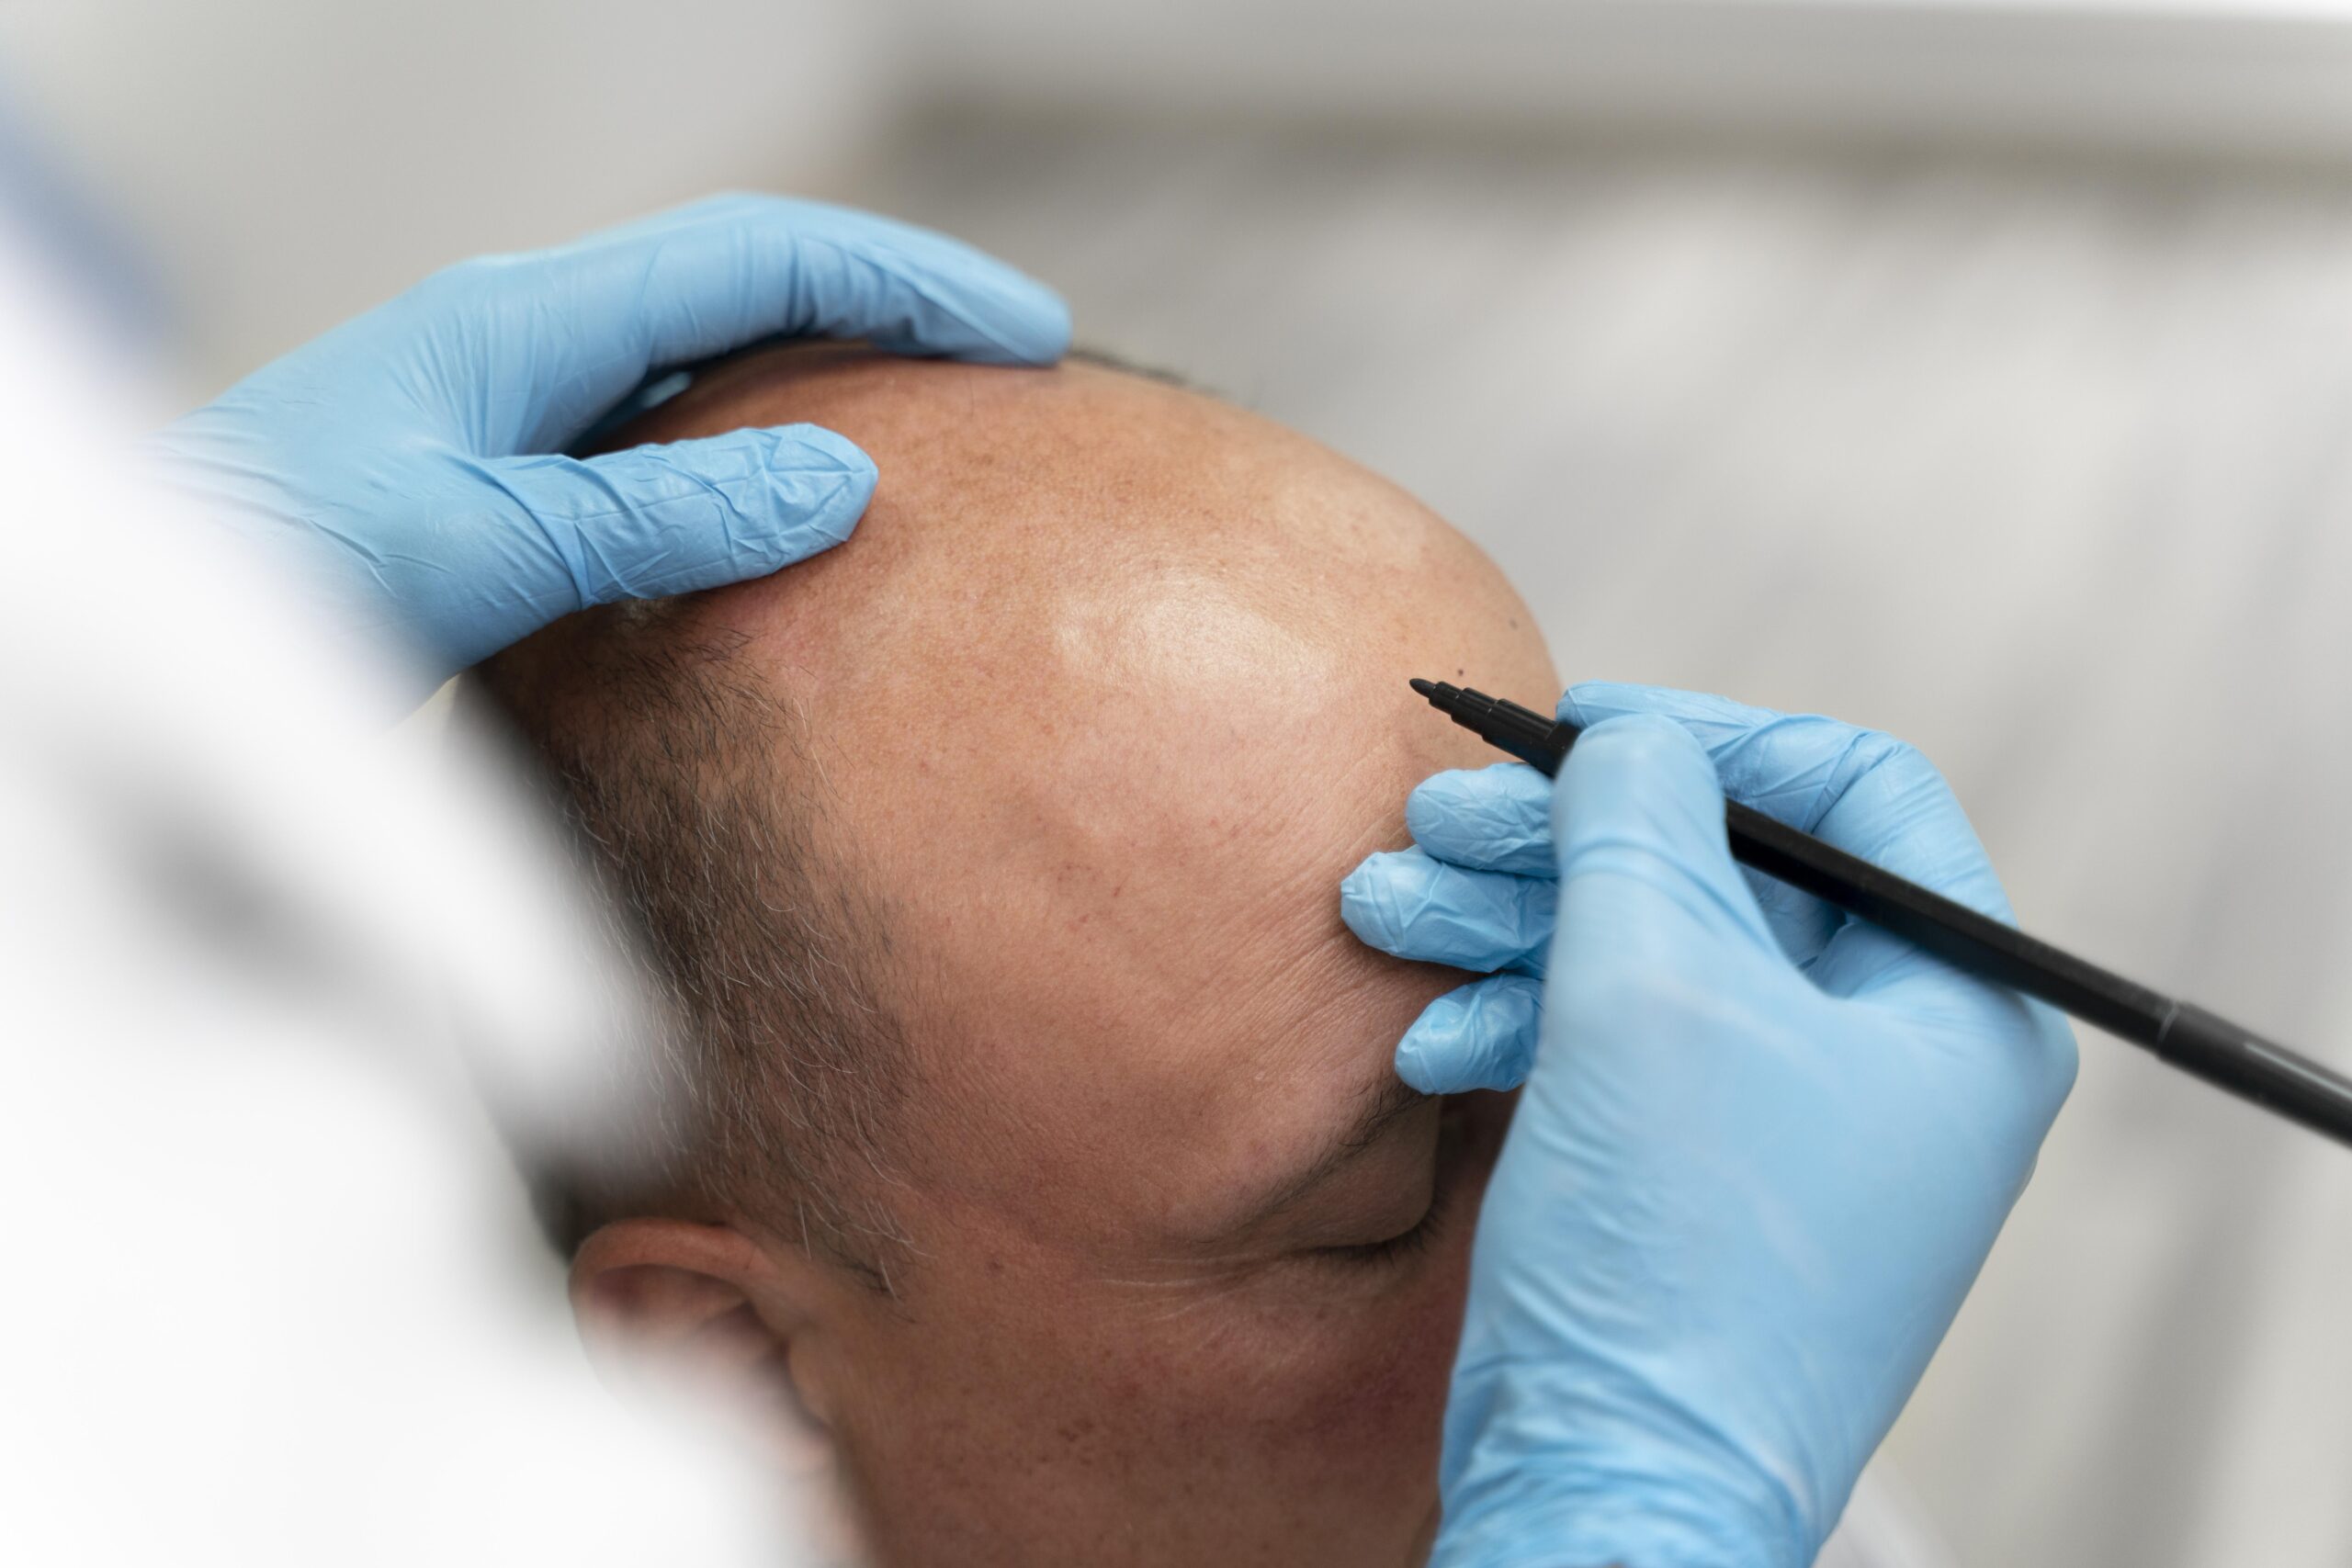 Turkey Hair Transplant Price vs. Other Countries